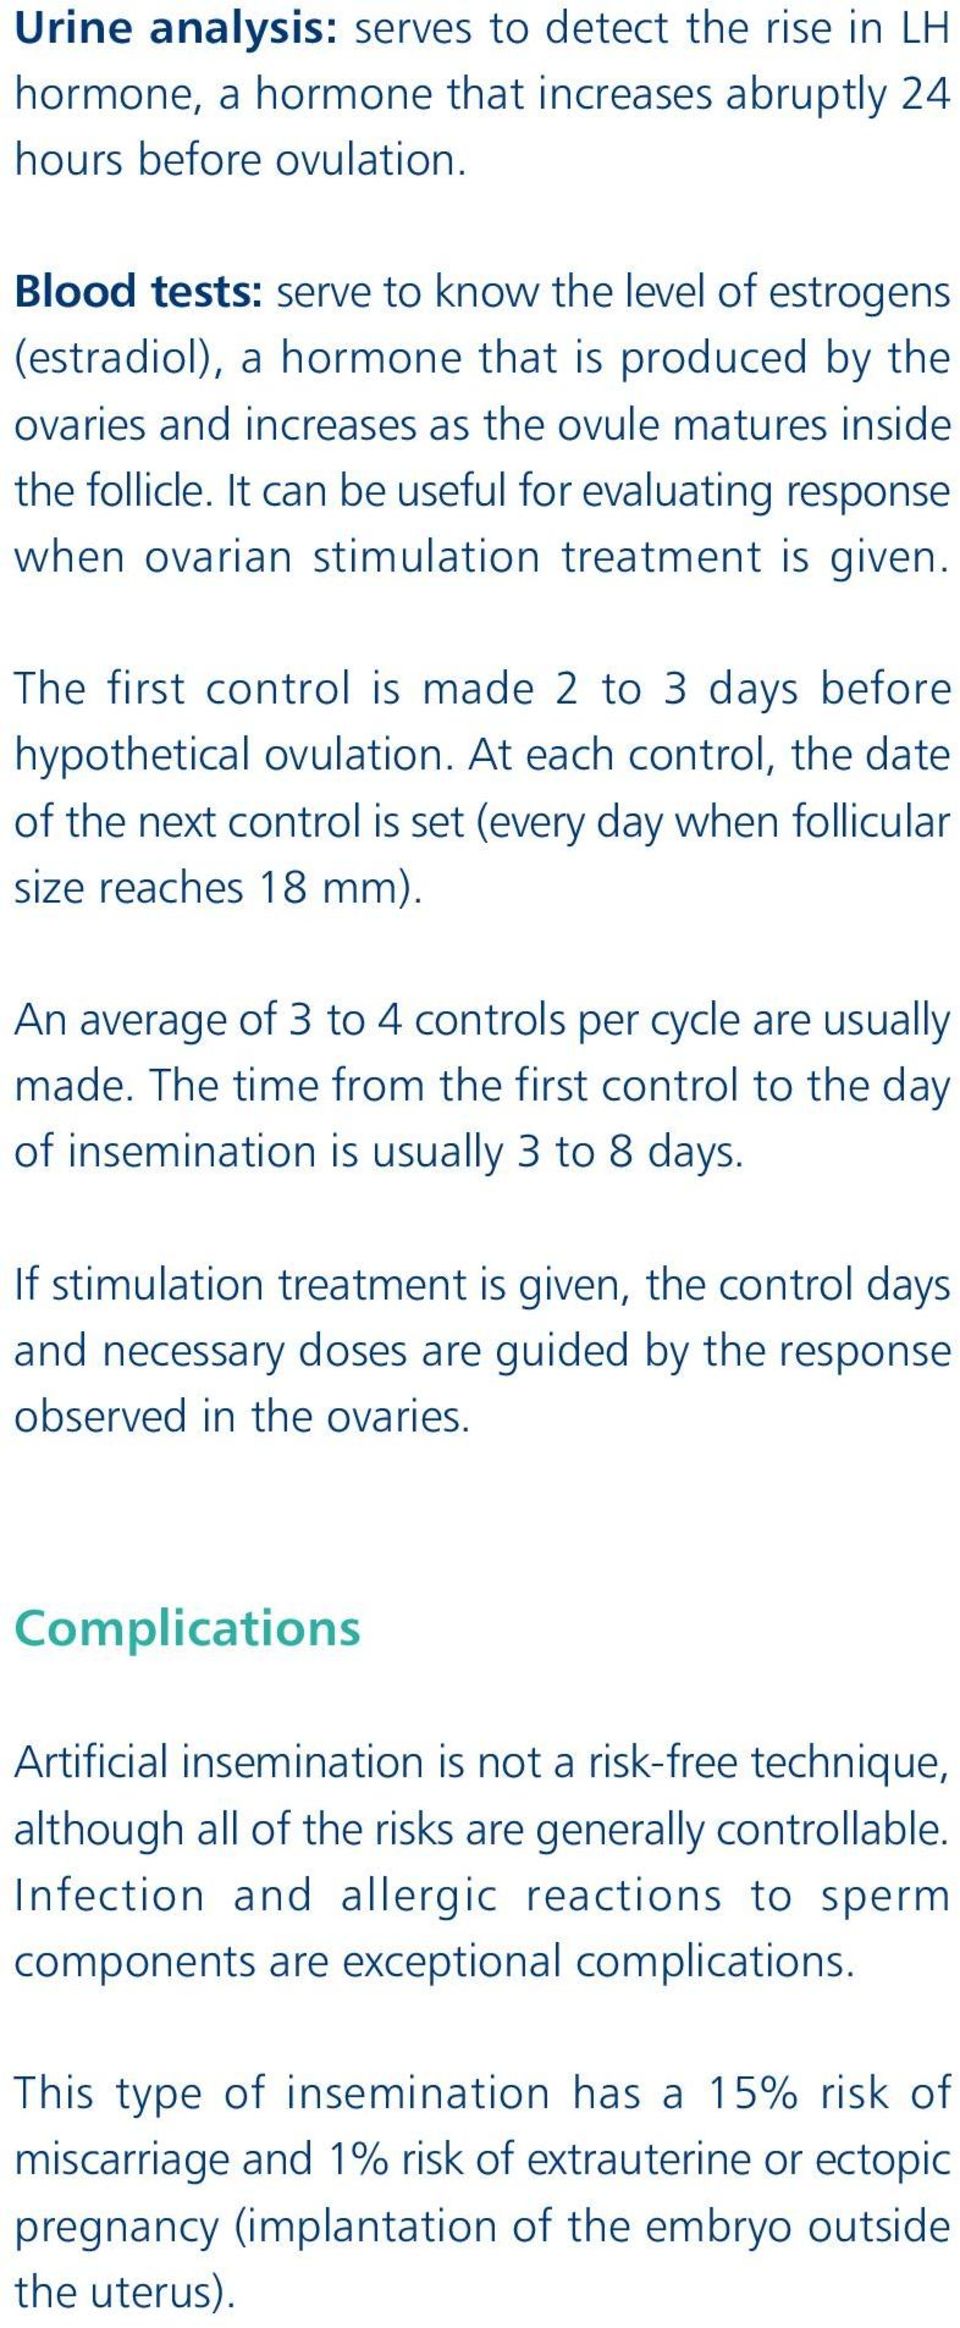 It can be useful for evaluating response when ovarian stimulation treatment is given. The first control is made 2 to 3 days before hypothetical ovulation.